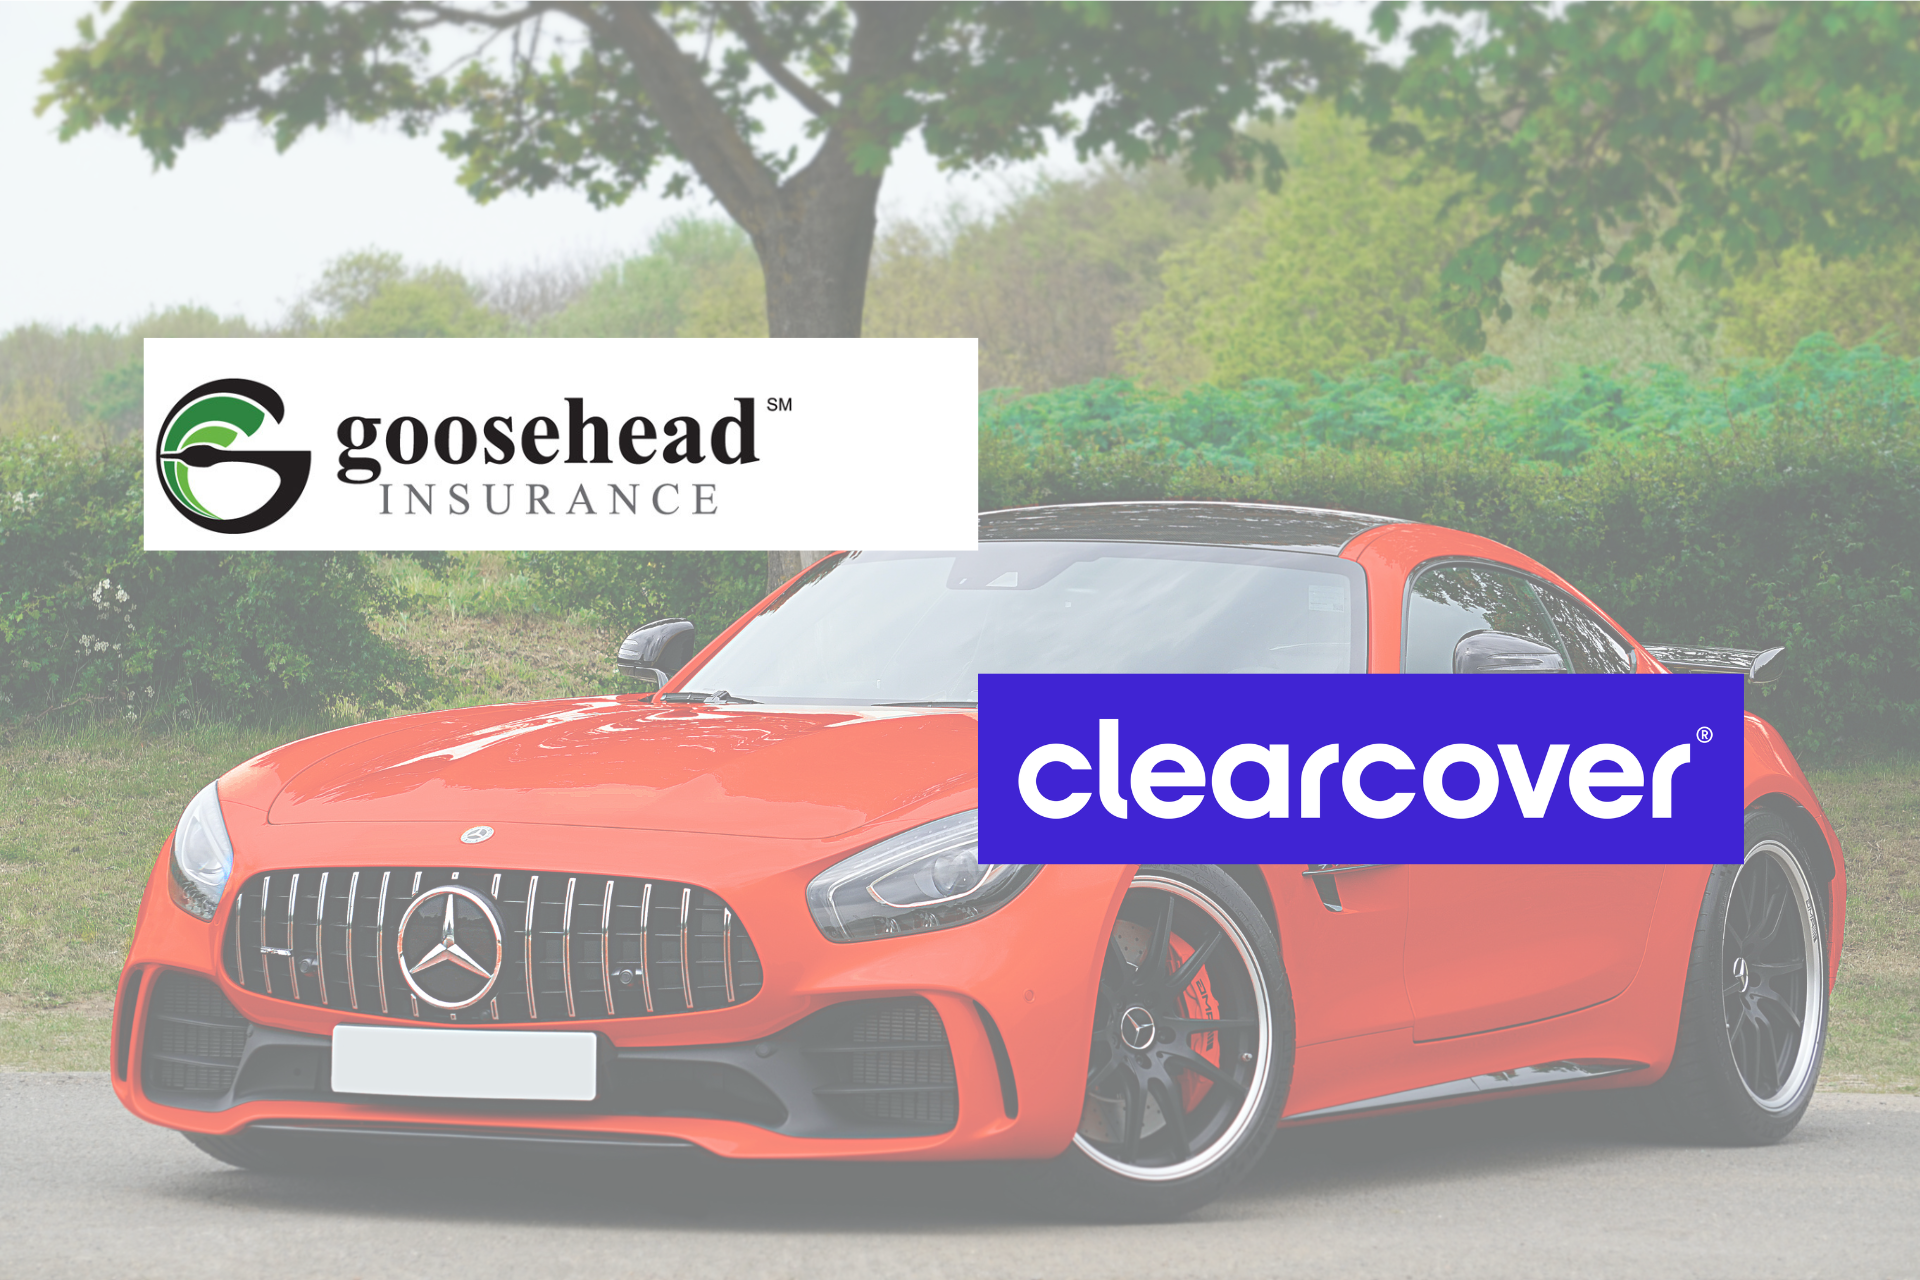 Clearcover Announces Expansion of Embedded Strategy Via Goosehead Insurance